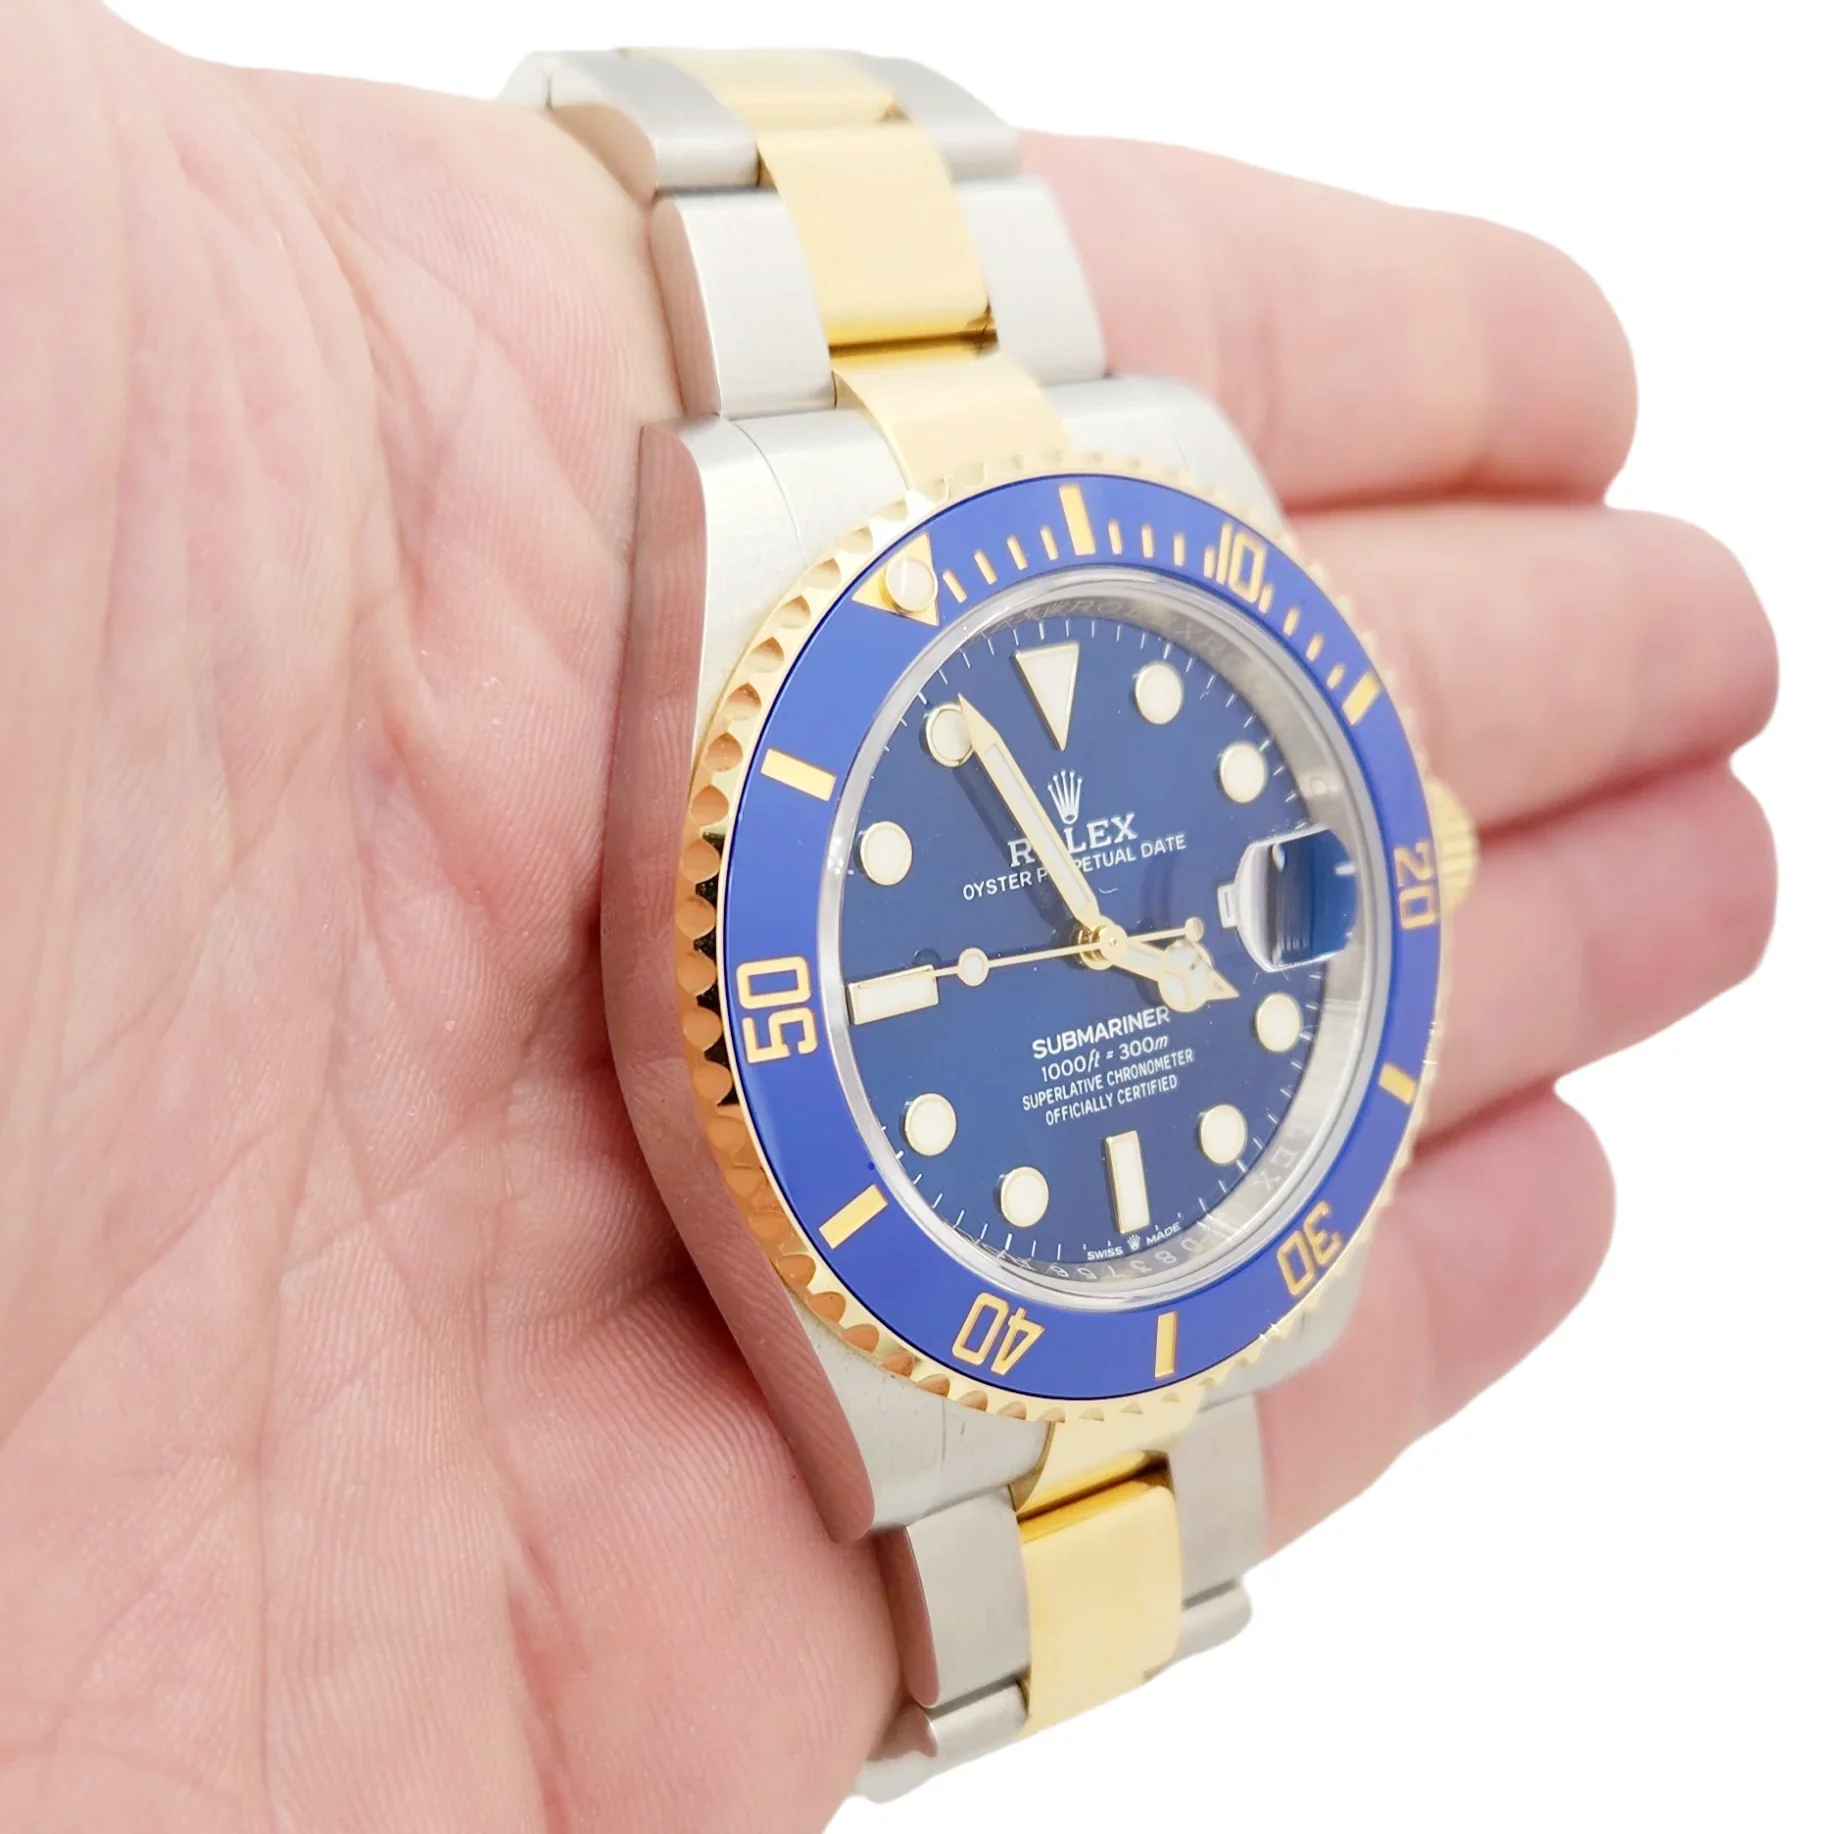 2022 Men's Rolex 40mm Submariner Oyster Perpetual Two Tone 18K Yellow Gold / Stainless Steel Watch with Blue Dial and Blue Bezel. (Unworn 126613LB)